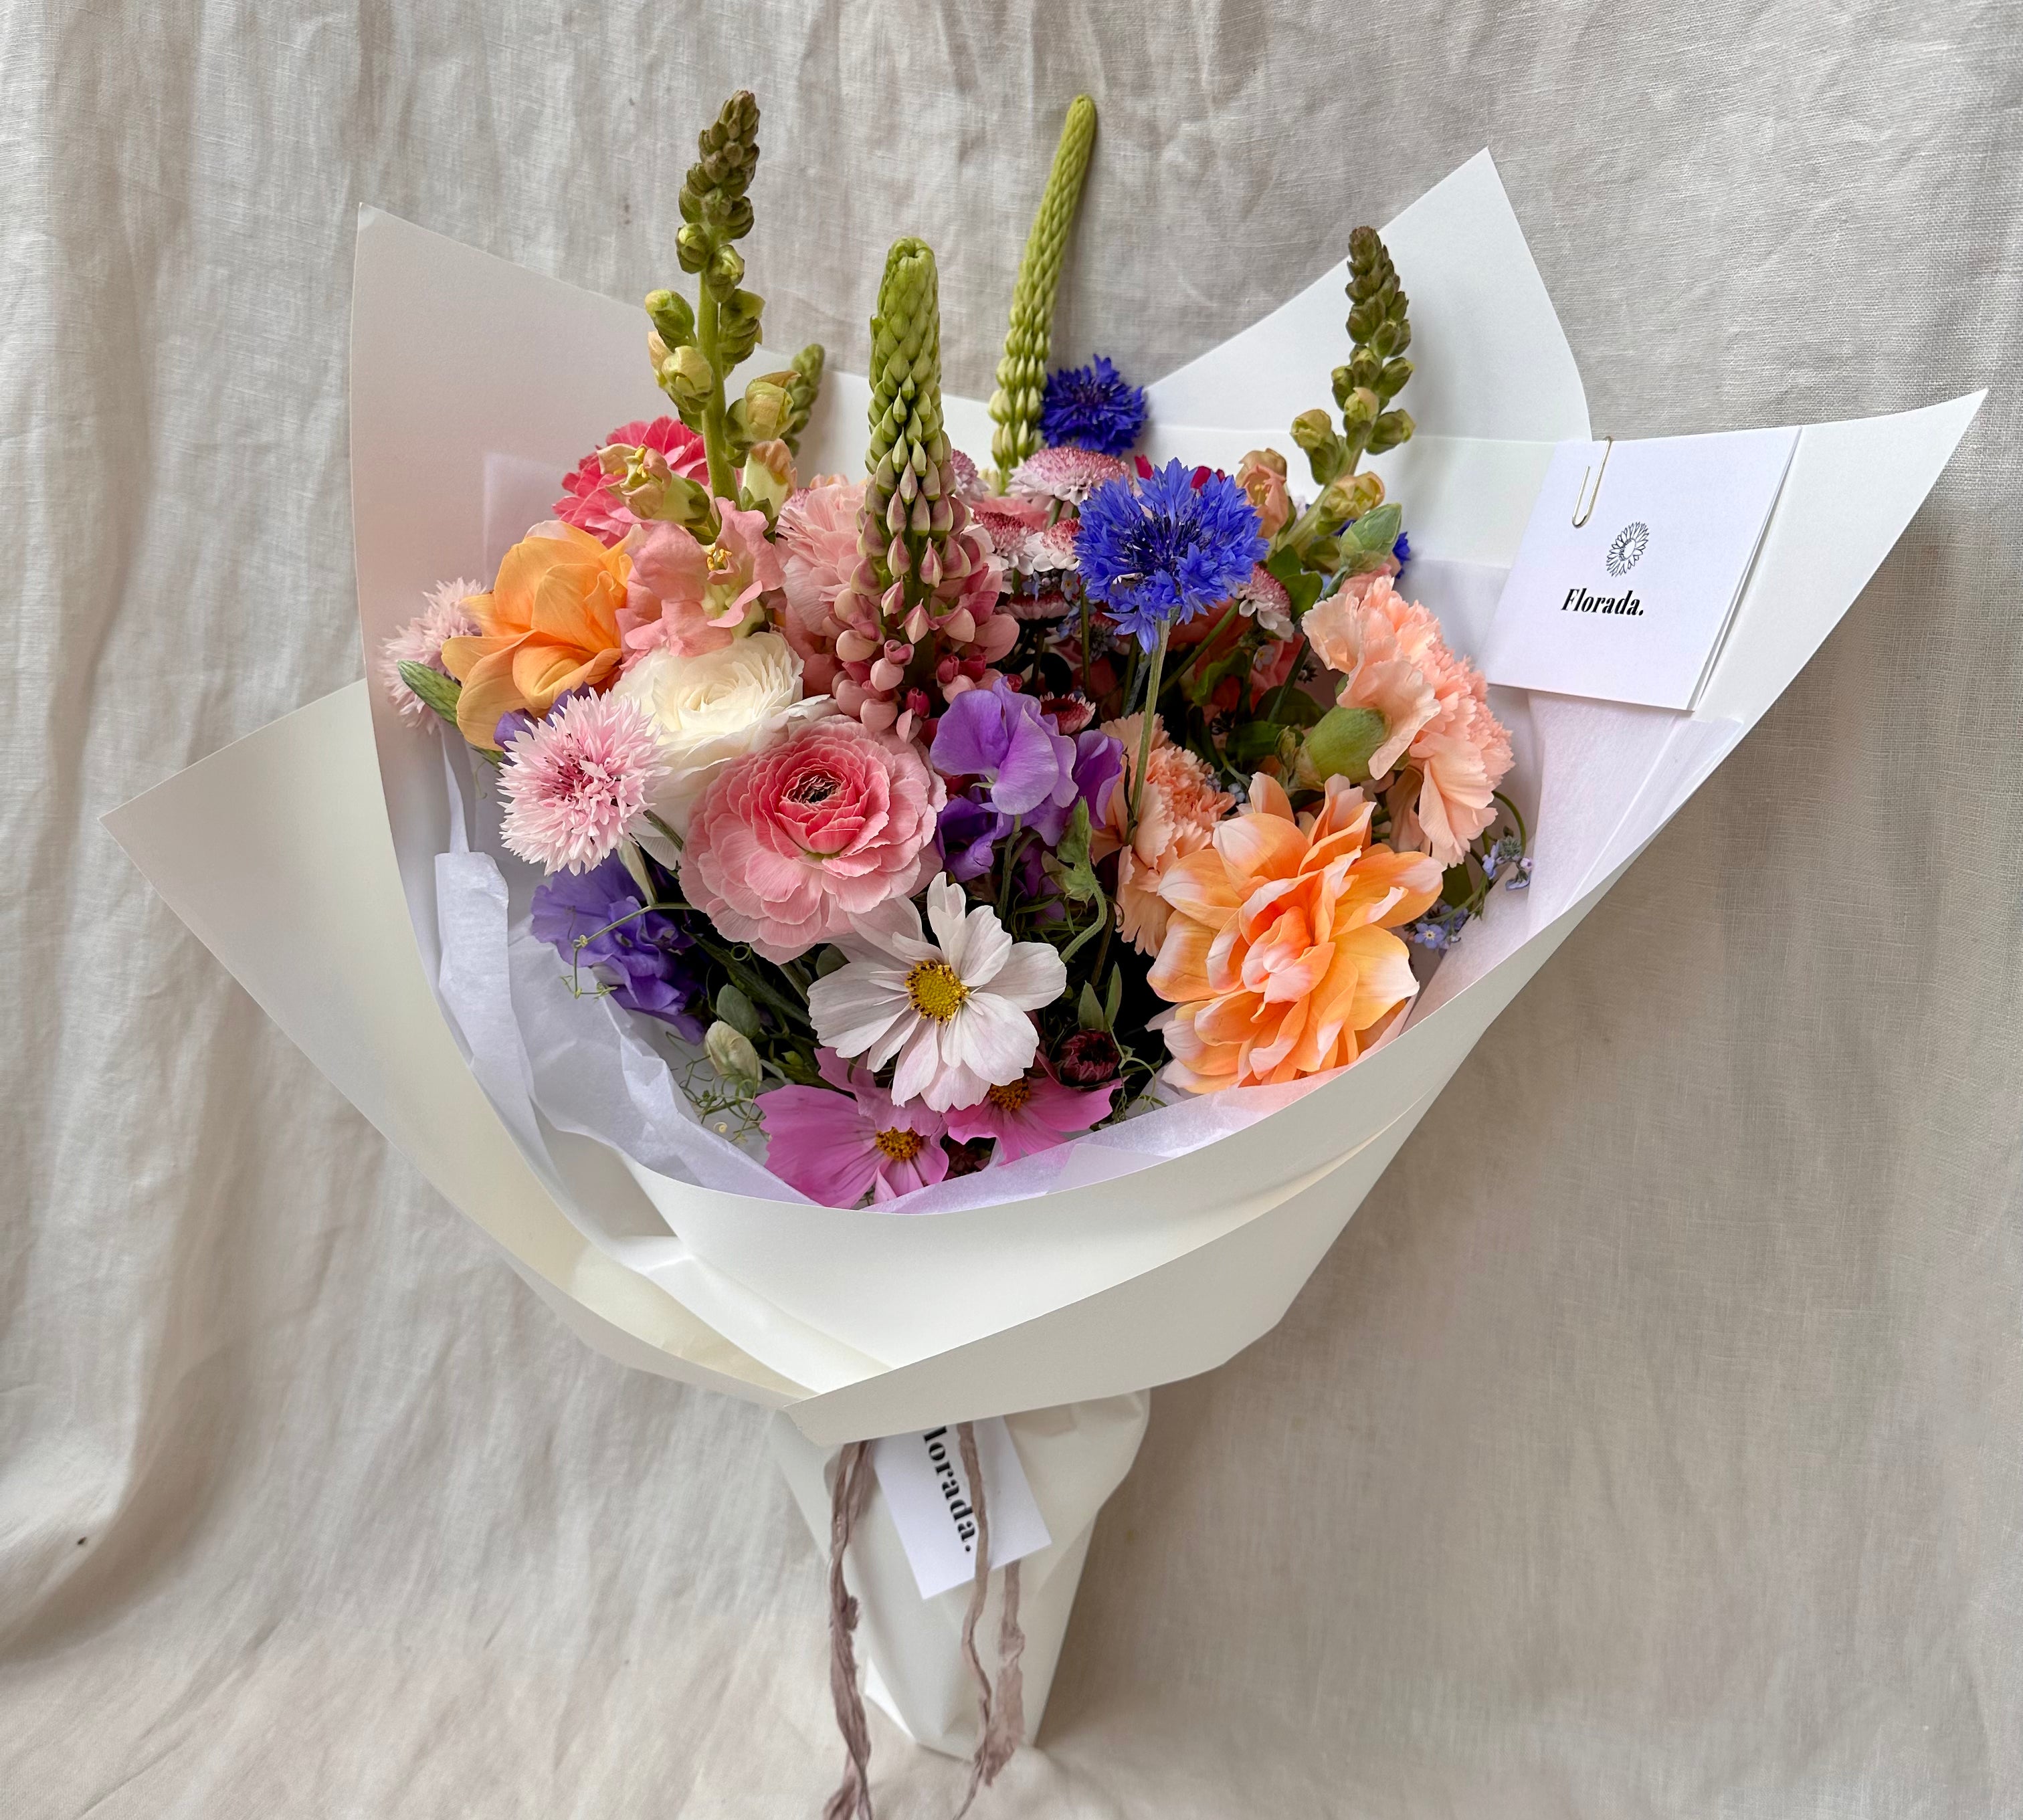 Florada floral bunch with mixed flowers as selected by florist including dahlias, ranunculus, lupins, cornflower, cosmos and carnations. 